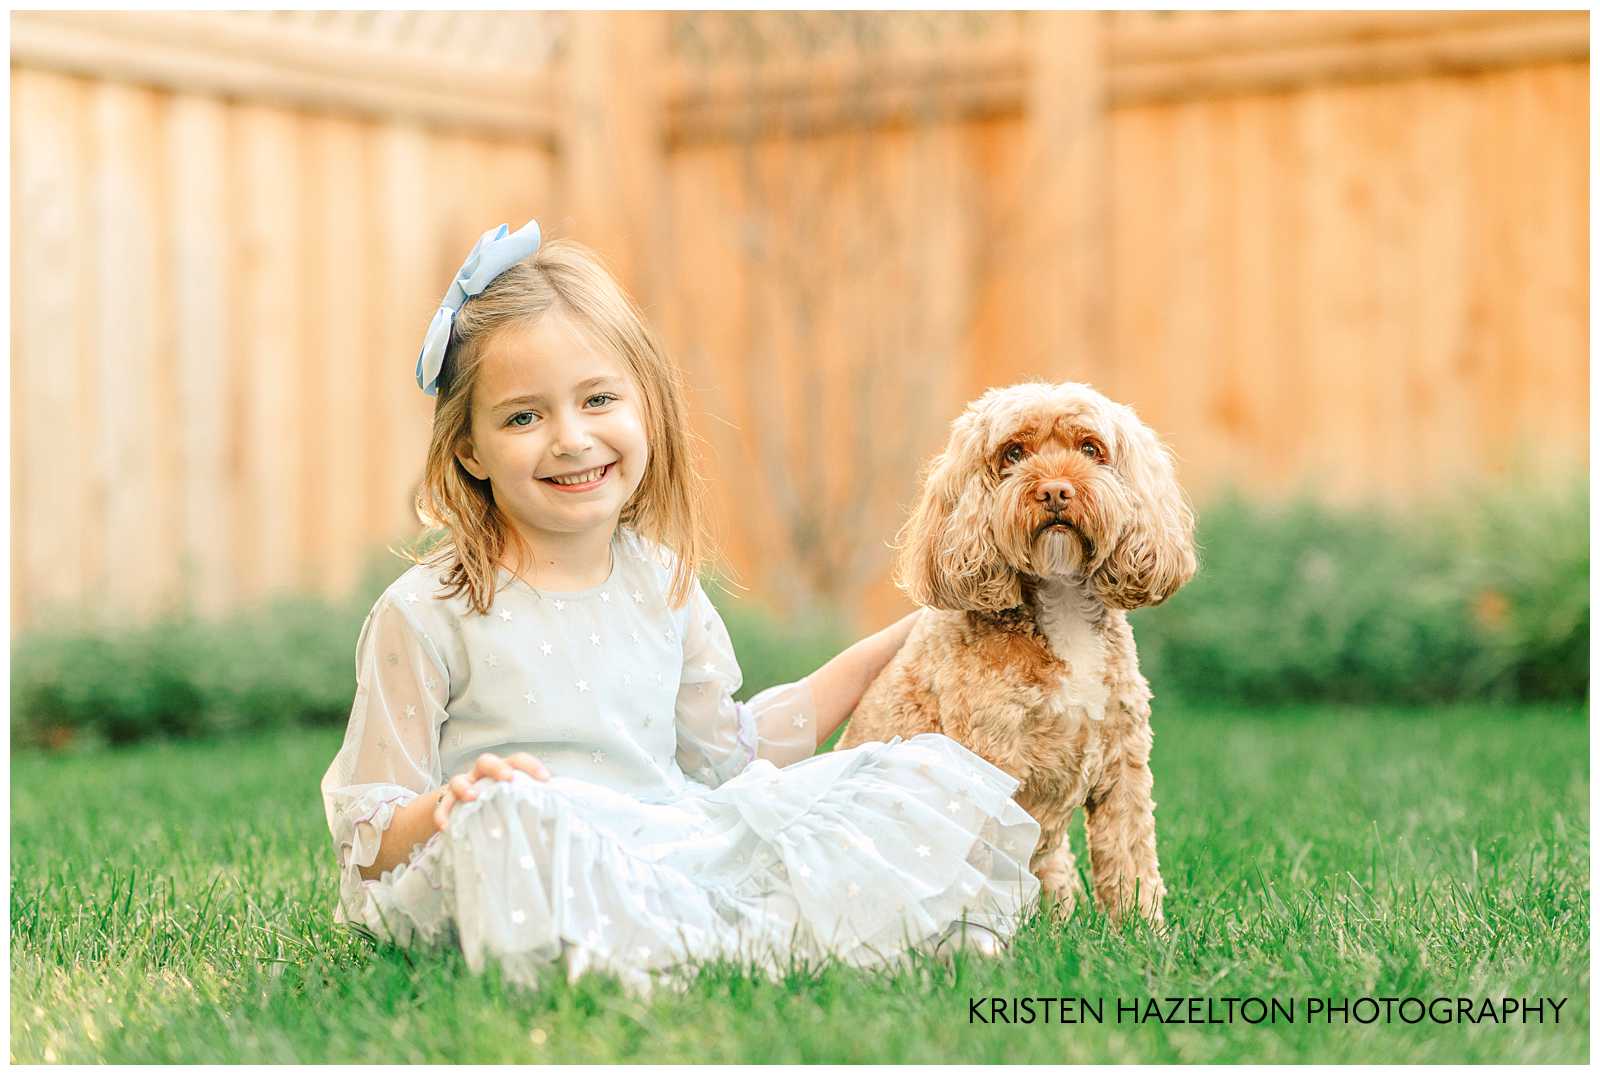 Young girl sitting on grass with her dog.